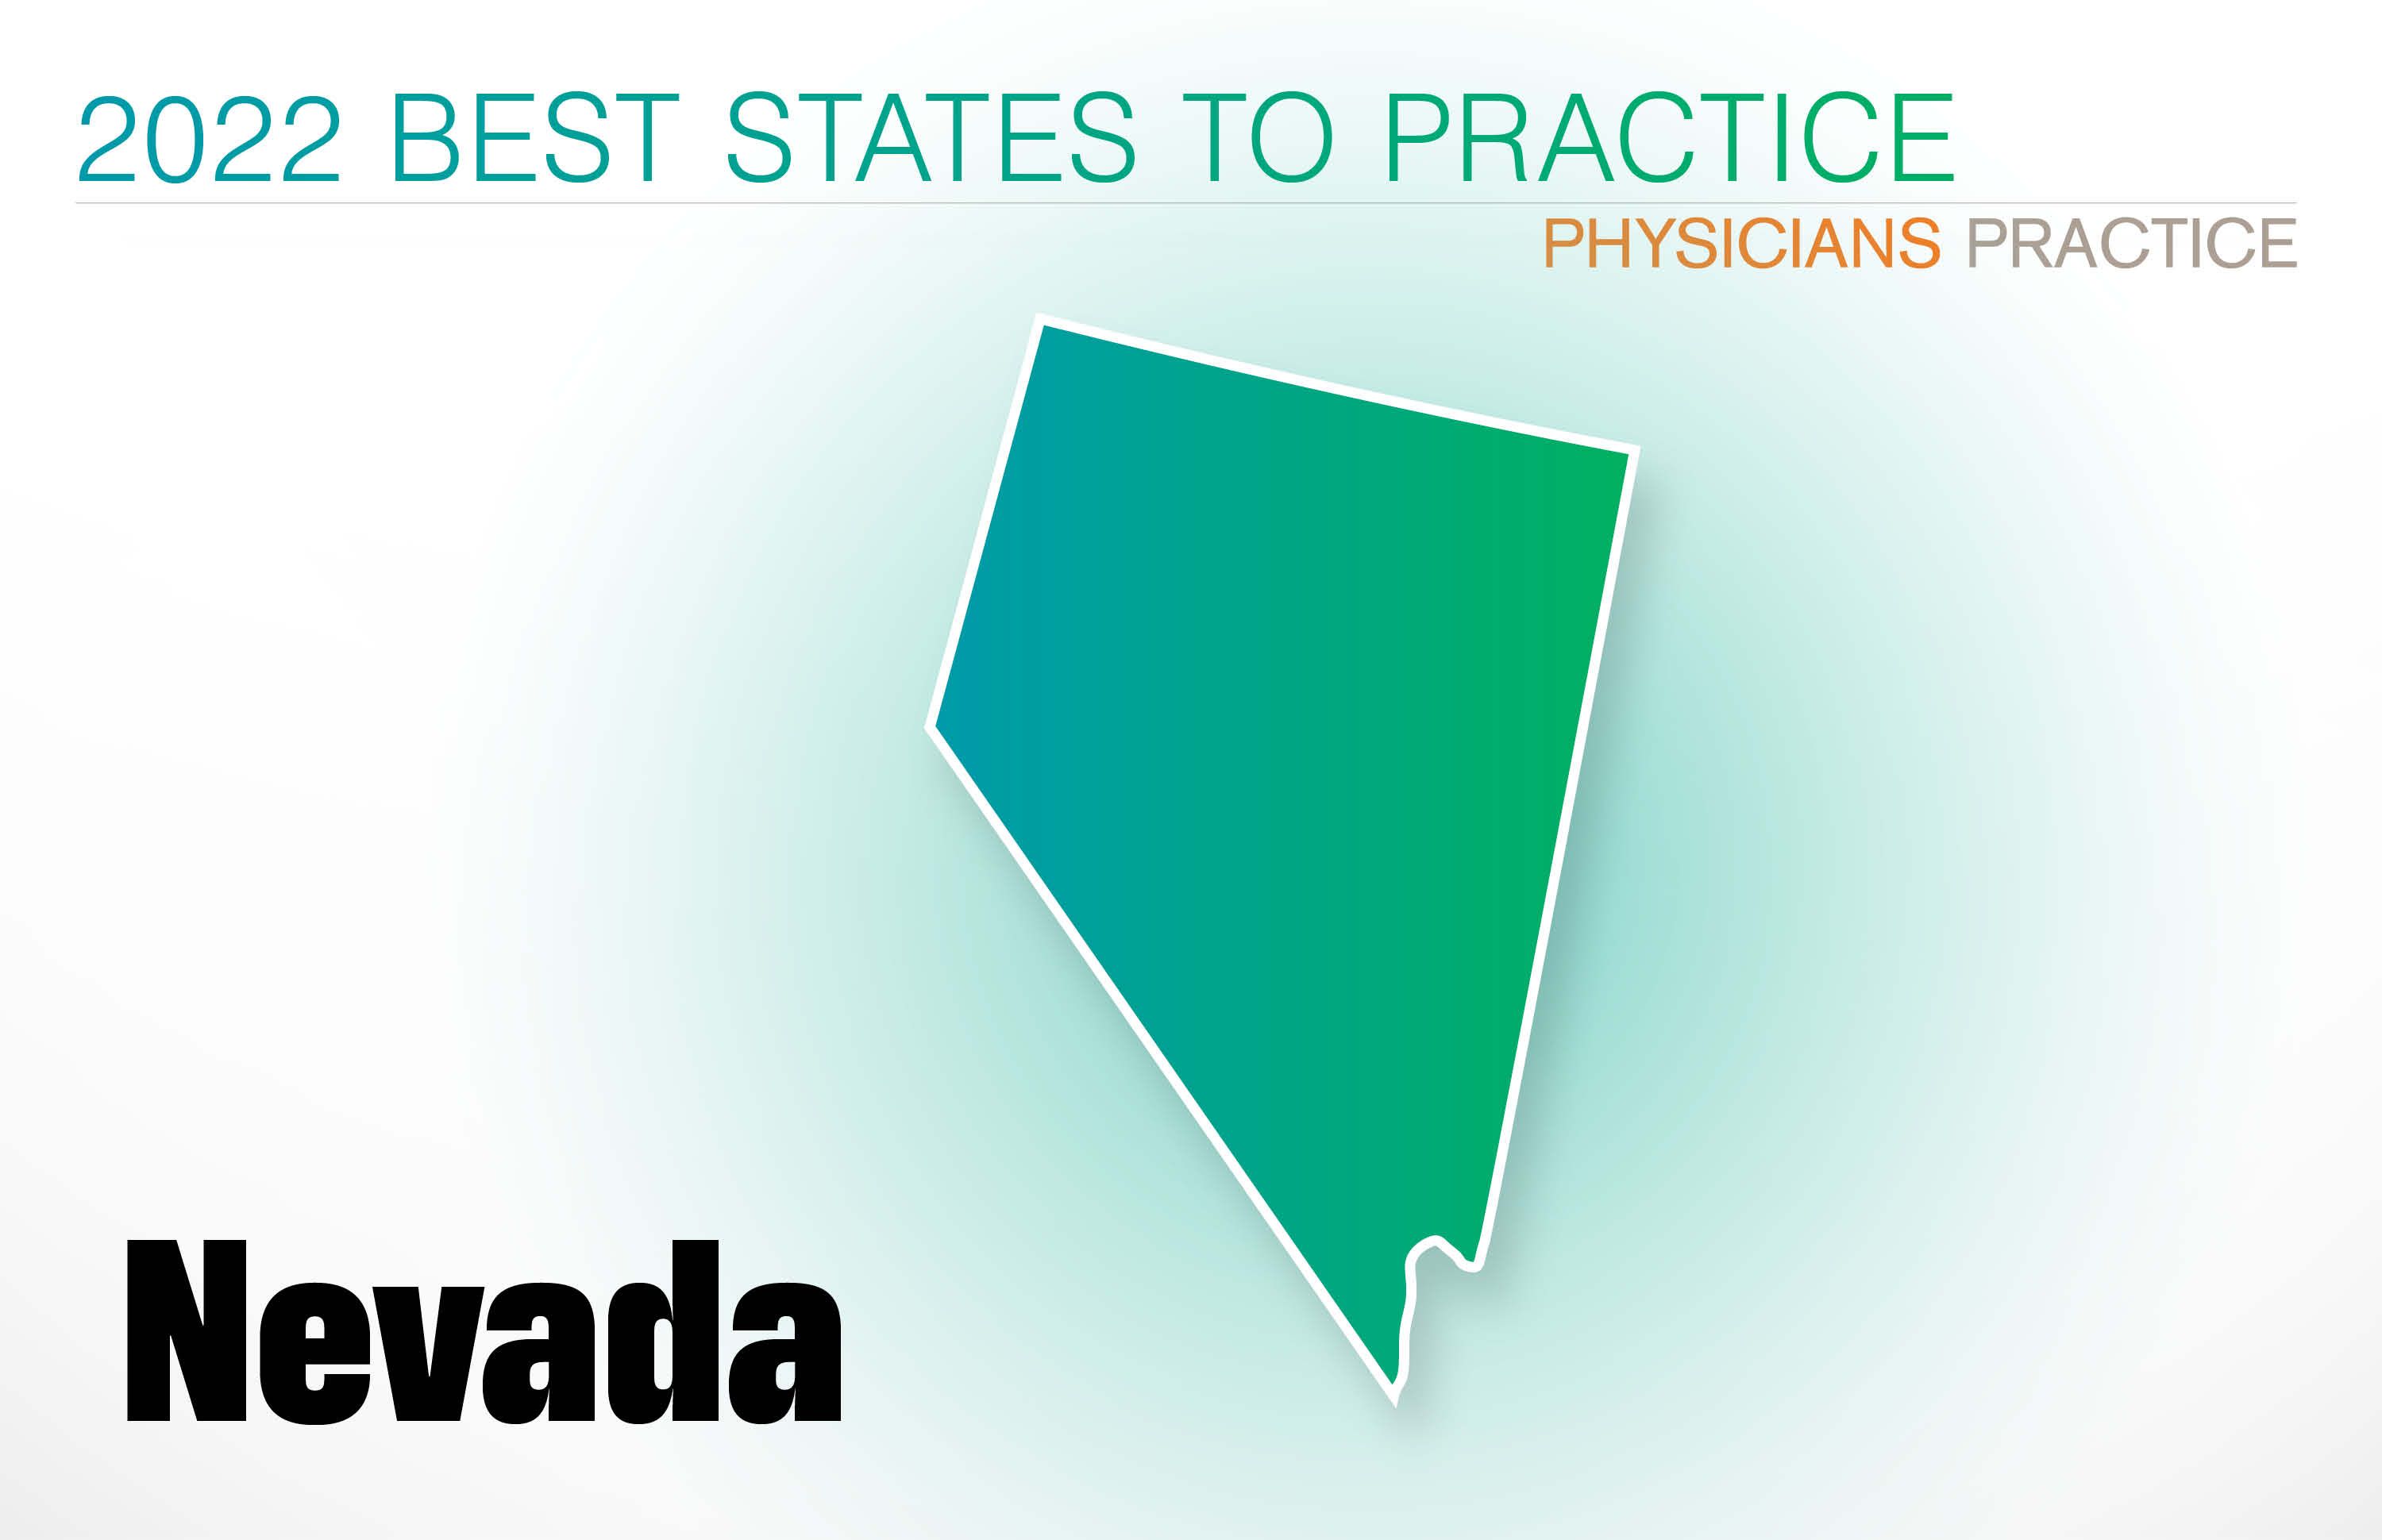 #29 Nevada Rankings: Cost of living: 32 Physician density: 6 Amount of state business taxes collected: 7 Average malpractice insurance rates: 46 Quality of life: 25 GPCI: 48